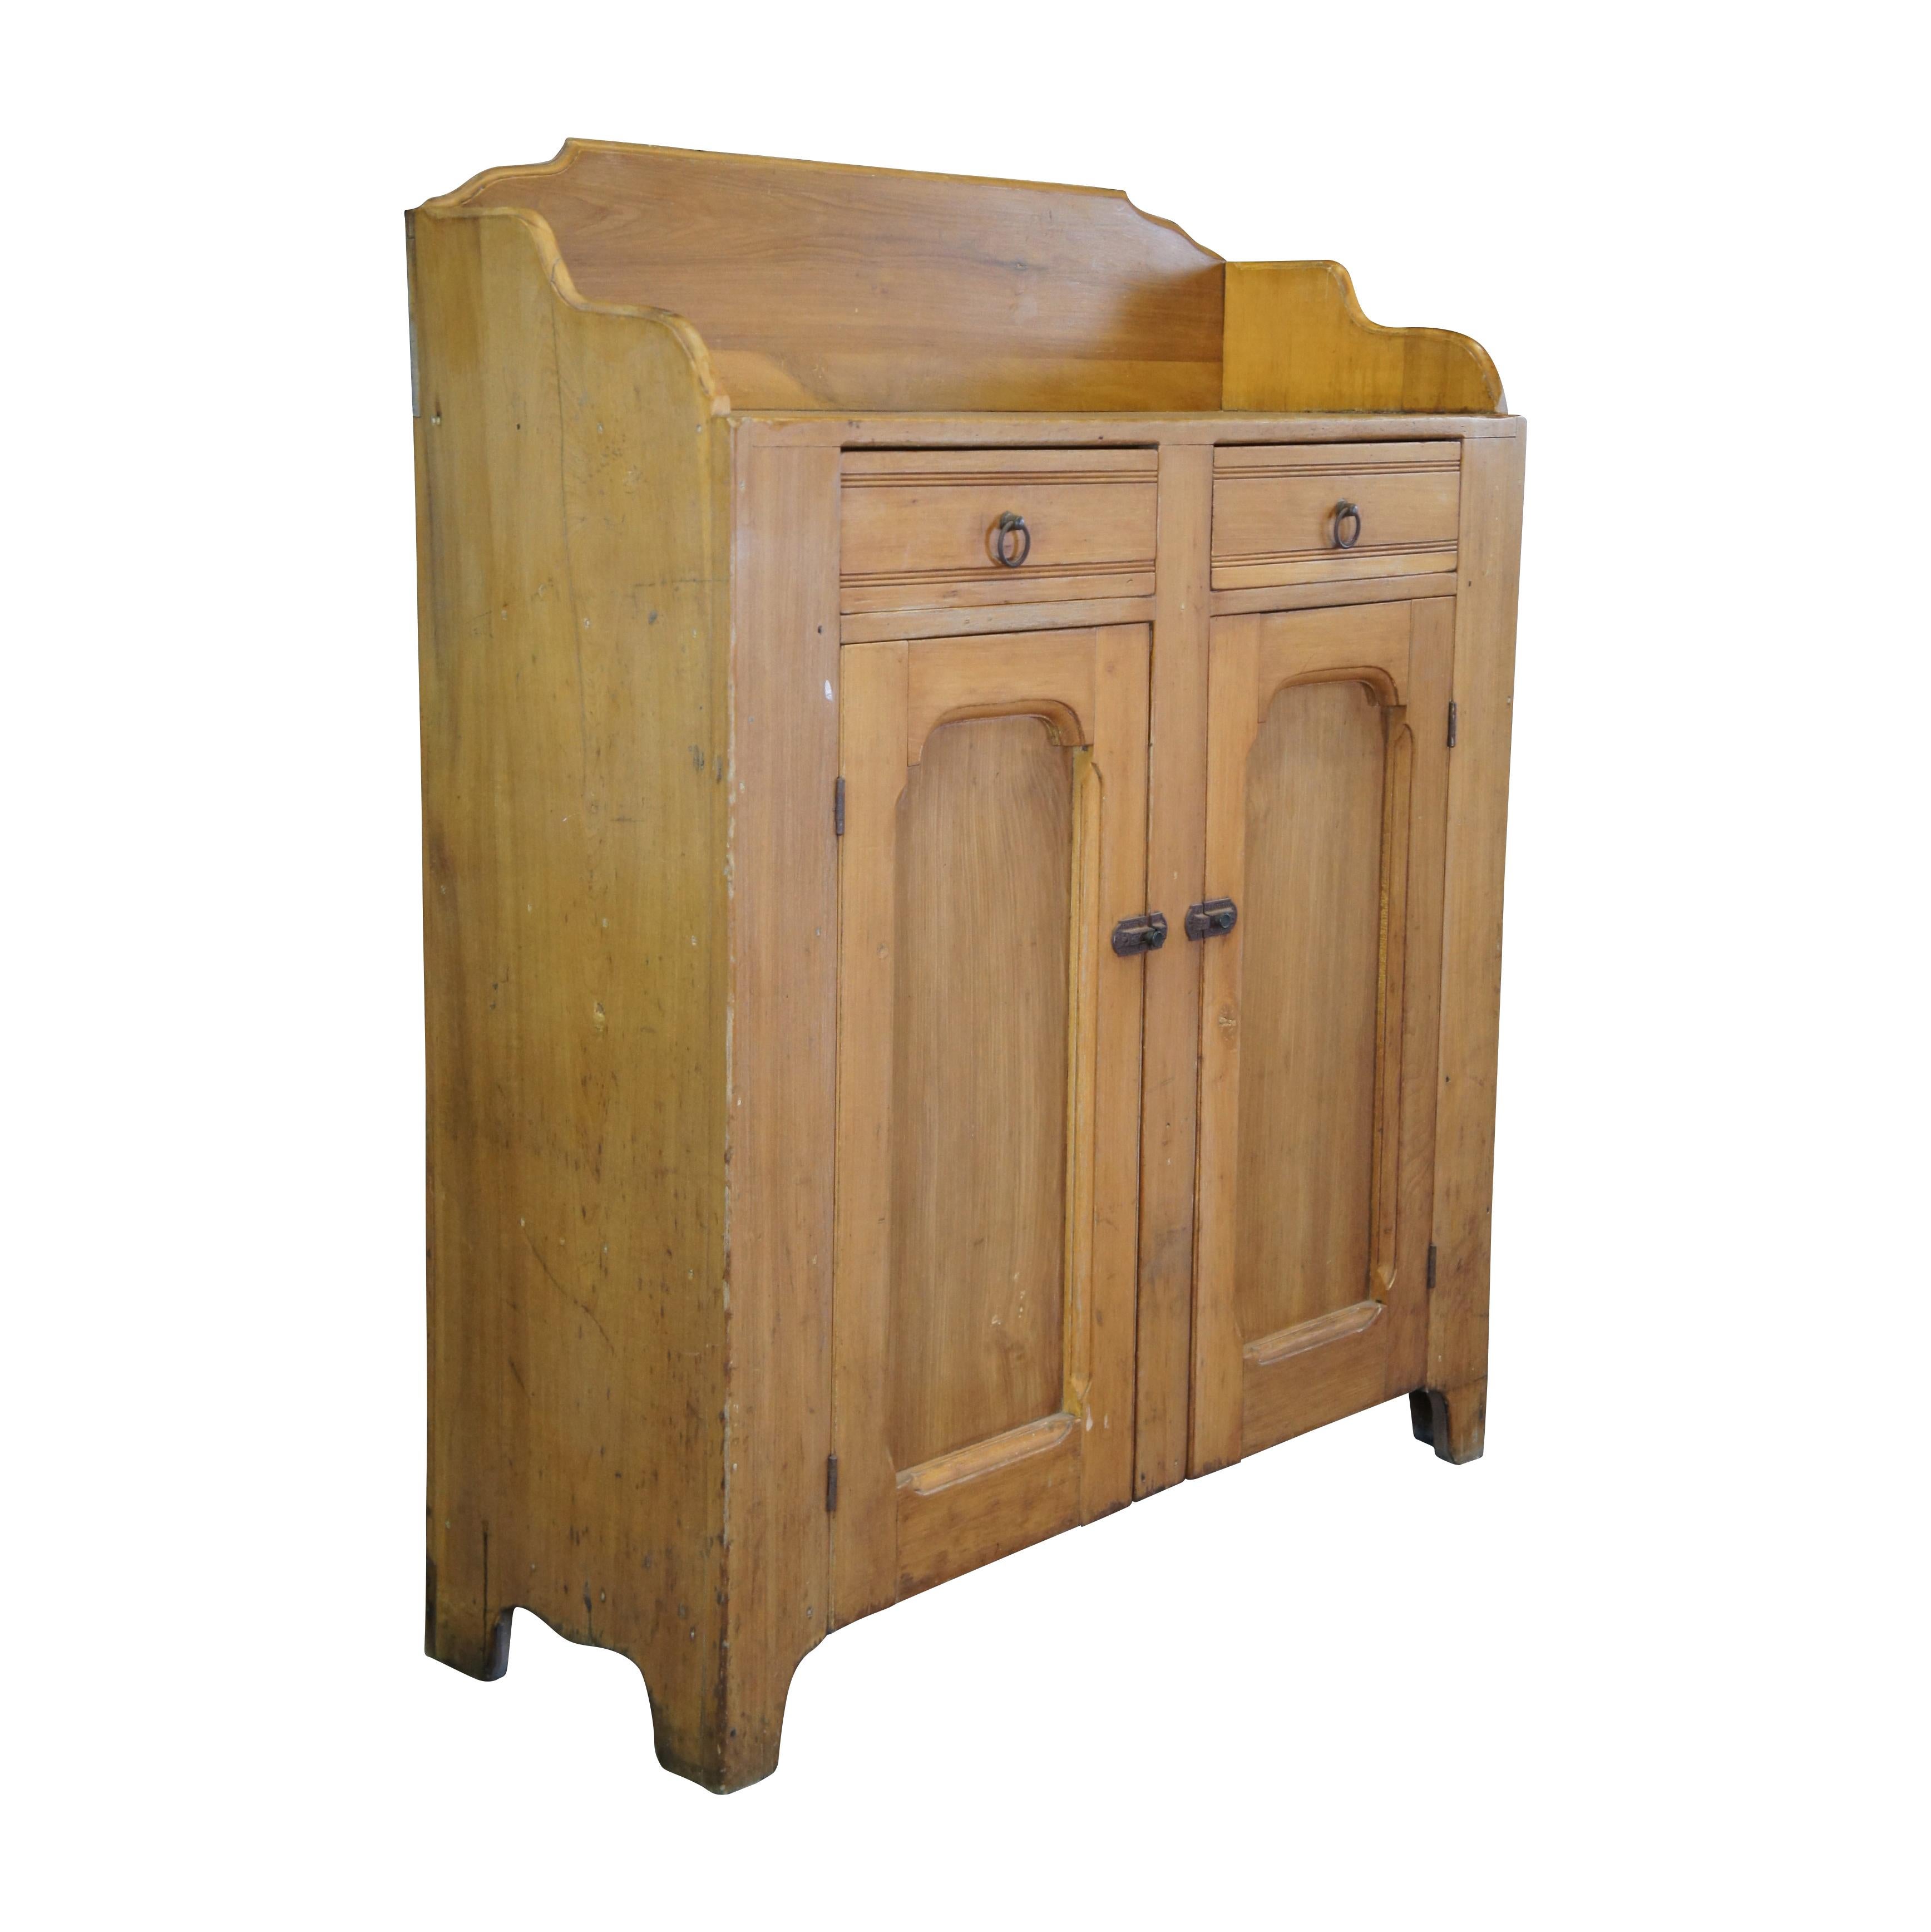 A warming handmade 19th Century Early American Jelly Cabinet or Pantry Cupboard, circa 1870s. A rectangular form made from Polar with an upper surface enclosed by a serpentine backsplash over two hand dovetailed drawers and lower cupboard with two